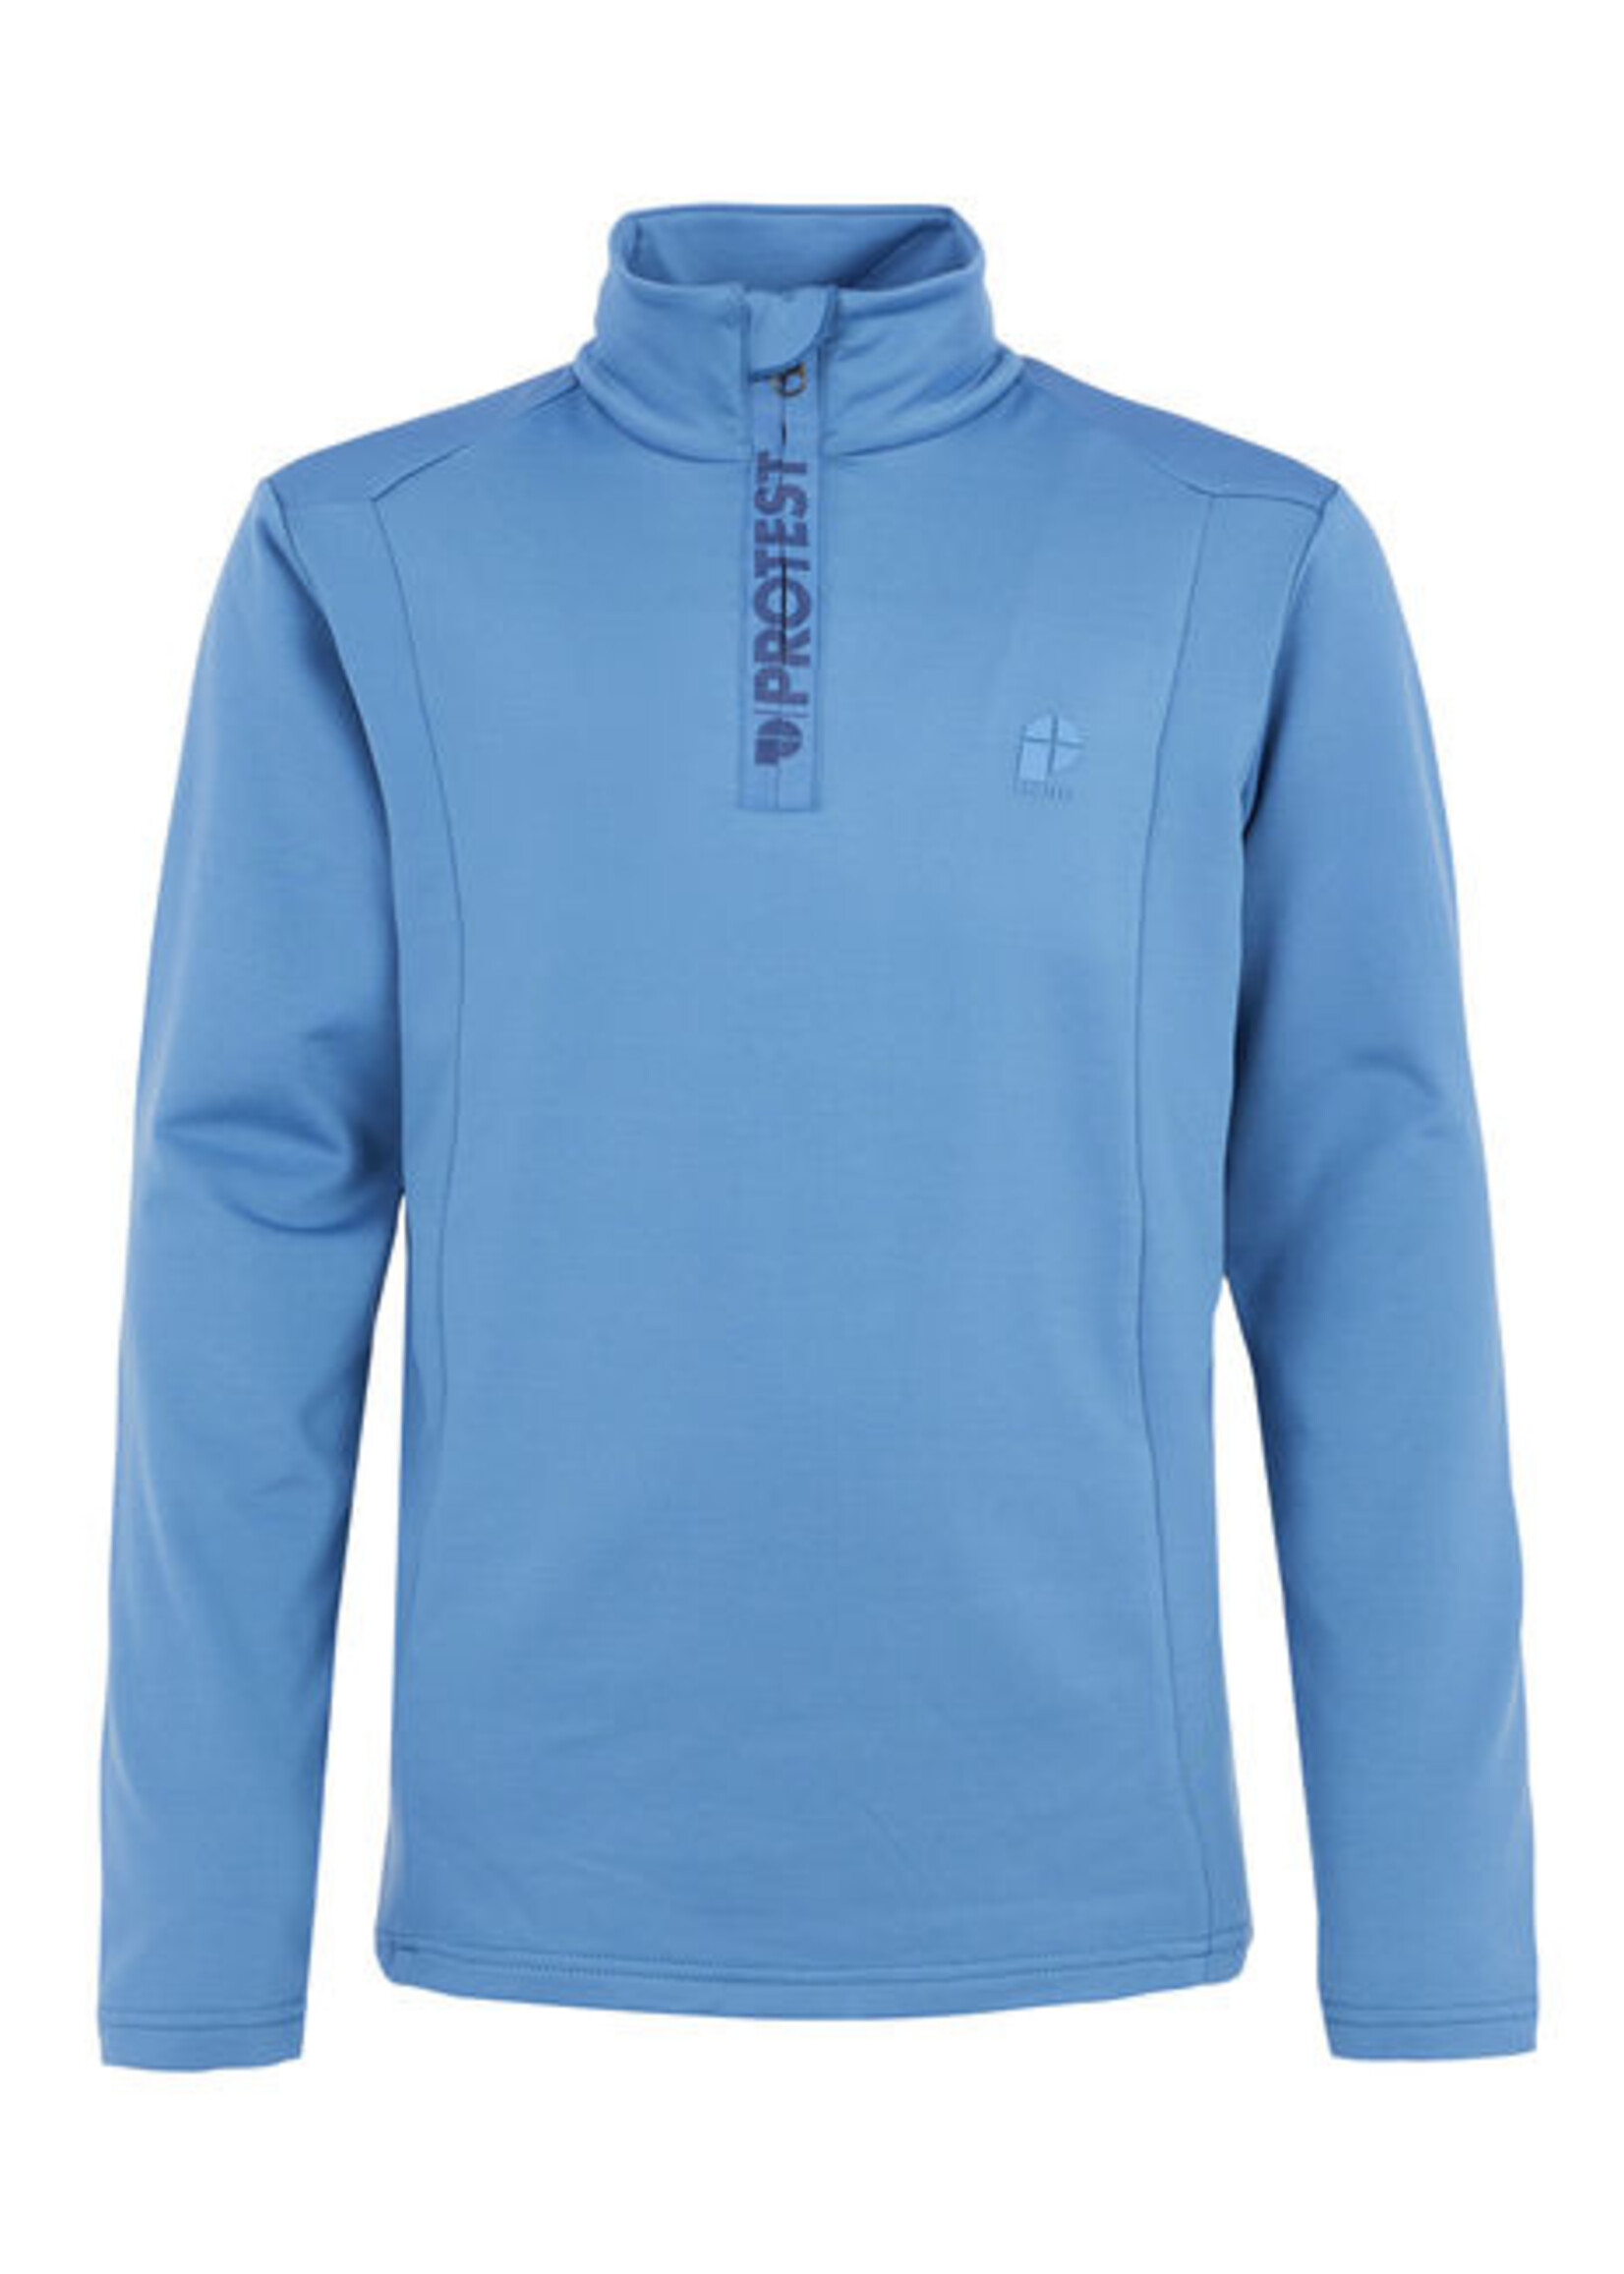 PROTEST  WILLOWY JR 1/4 zip top-Riviera Blue